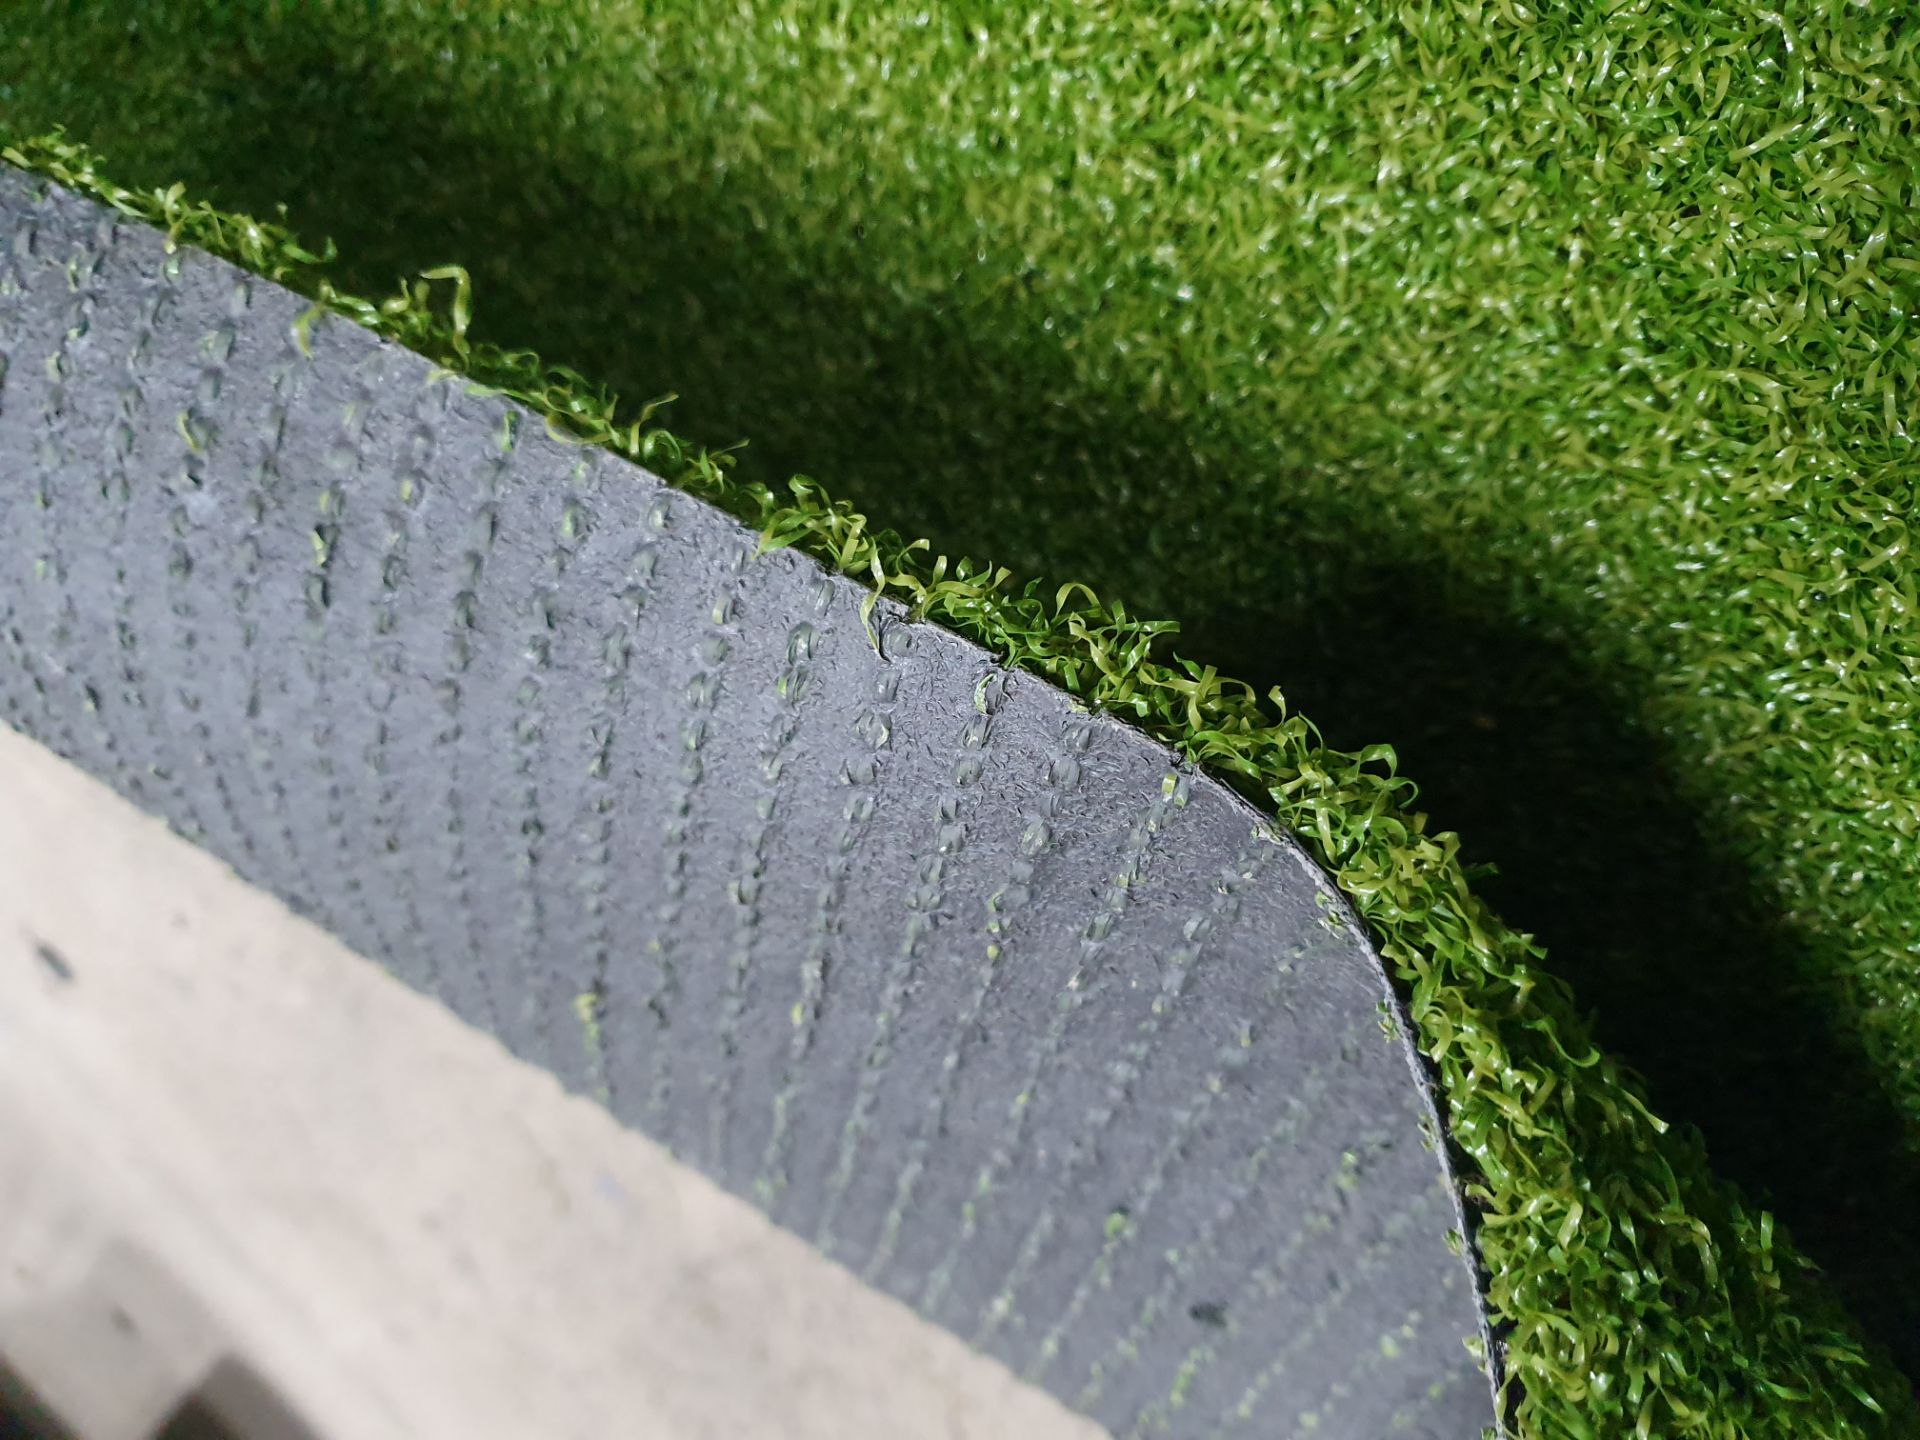 Roll of Green Artificial Grass | Approximate size: 1.8m x 3m